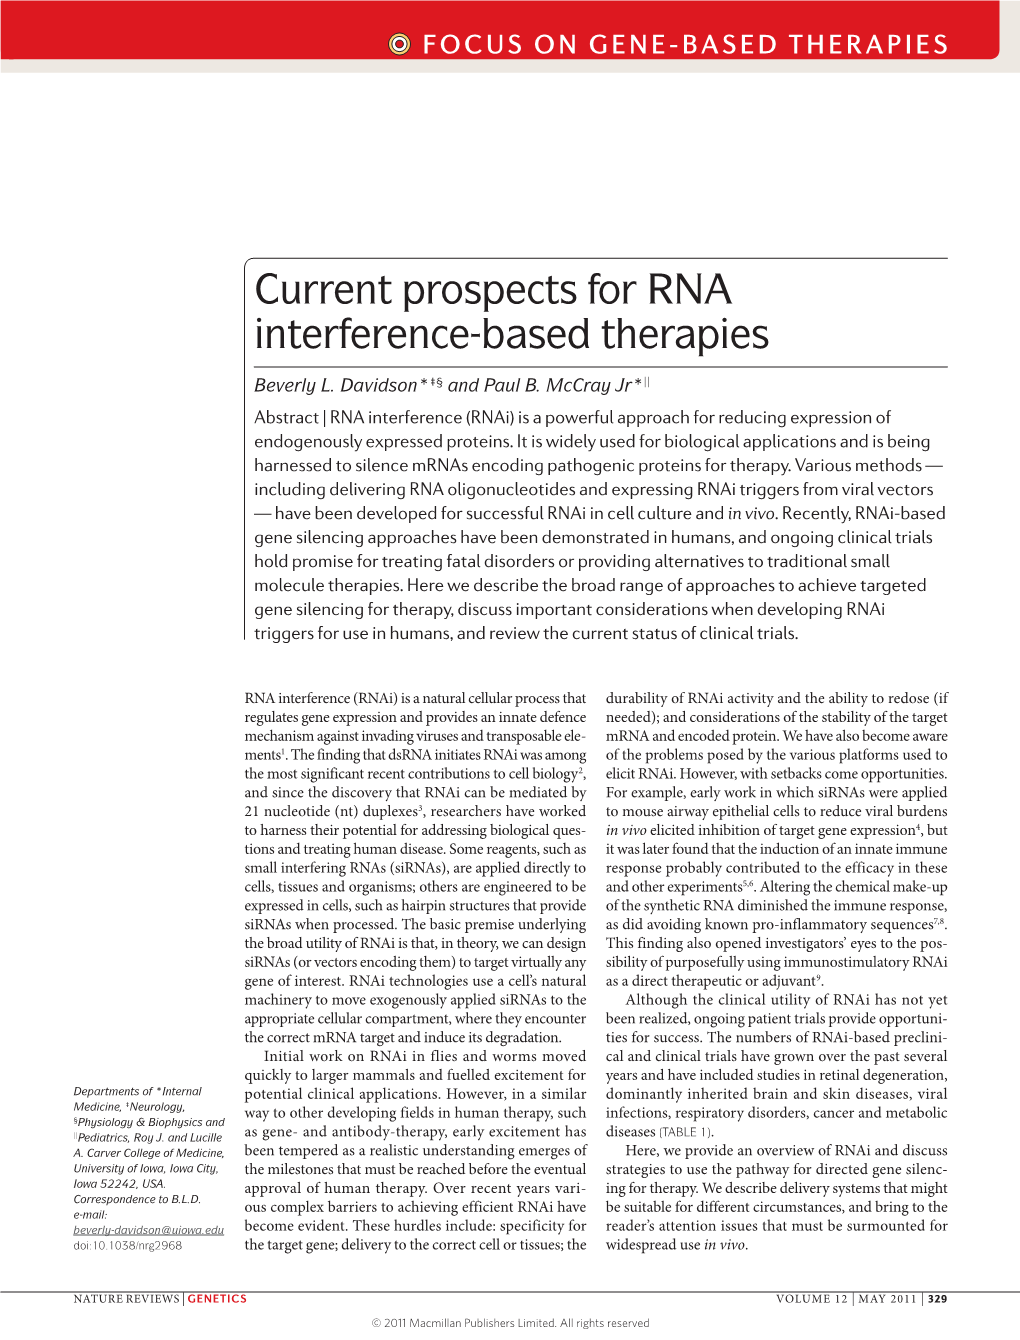 Current Prospects for RNA Interference-Based Therapies